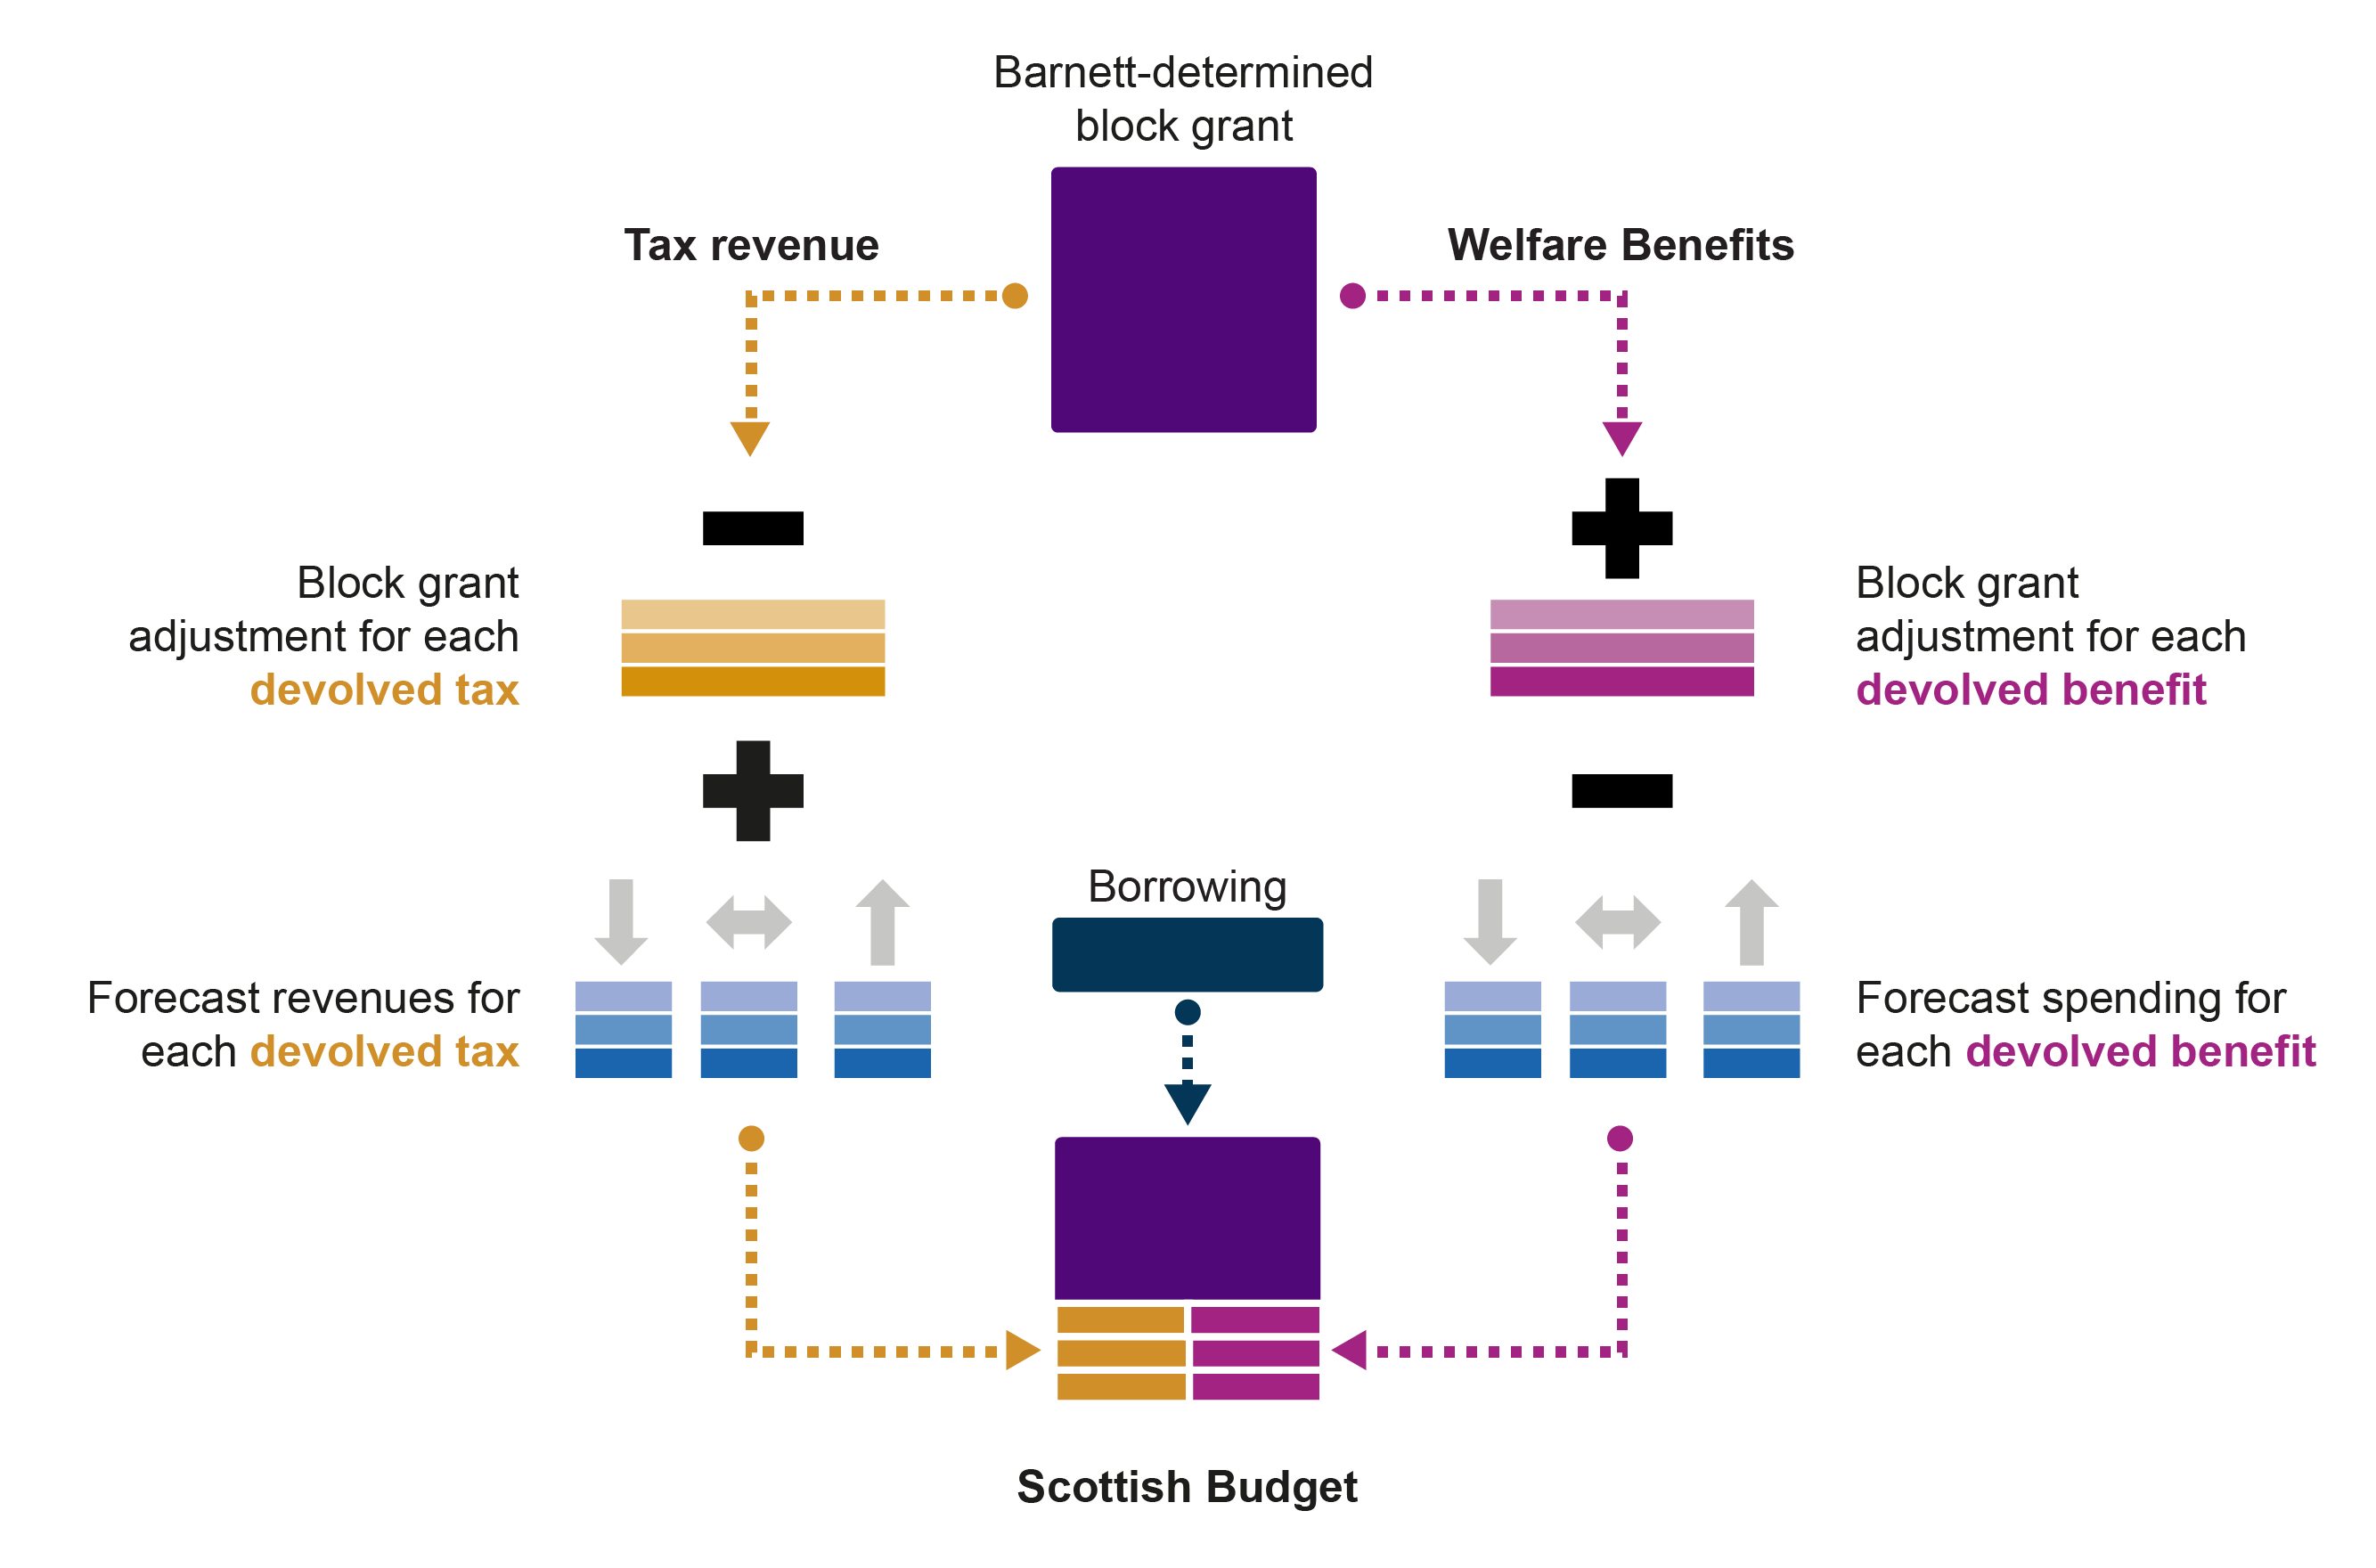 A graphic illustrating the factors that determine the size of the Scottish Budget. This shows that block grant adjustments and forecast revenues for each devolved tax, and block grant adjustments and forecast spending for each devolved benefit both impact on the total budget.